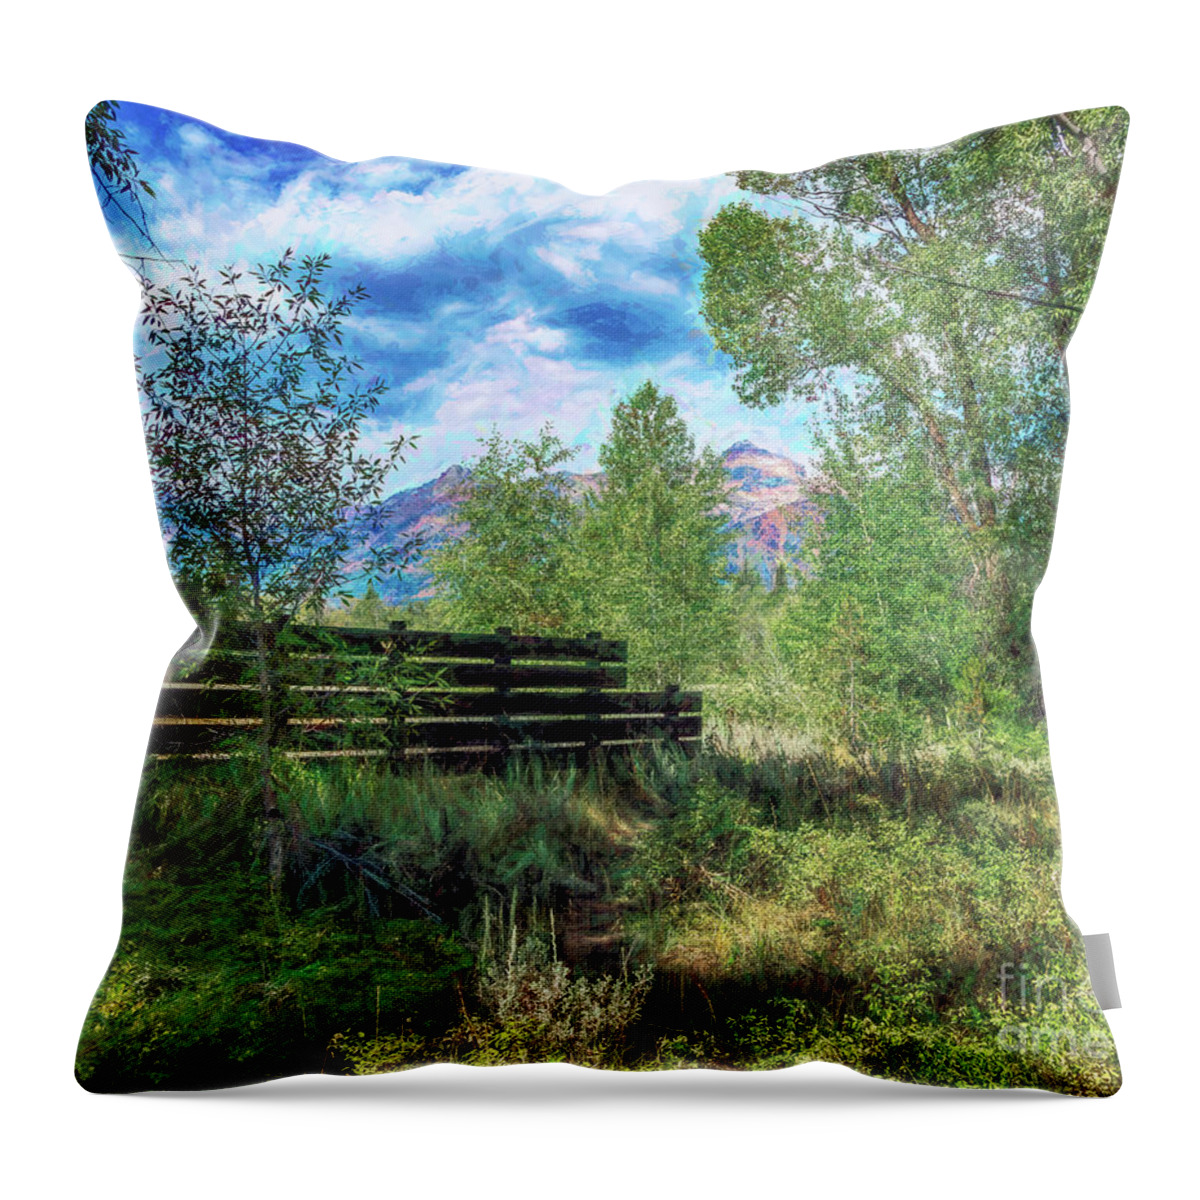 Blue Throw Pillow featuring the photograph Bucolic Country View by Roslyn Wilkins